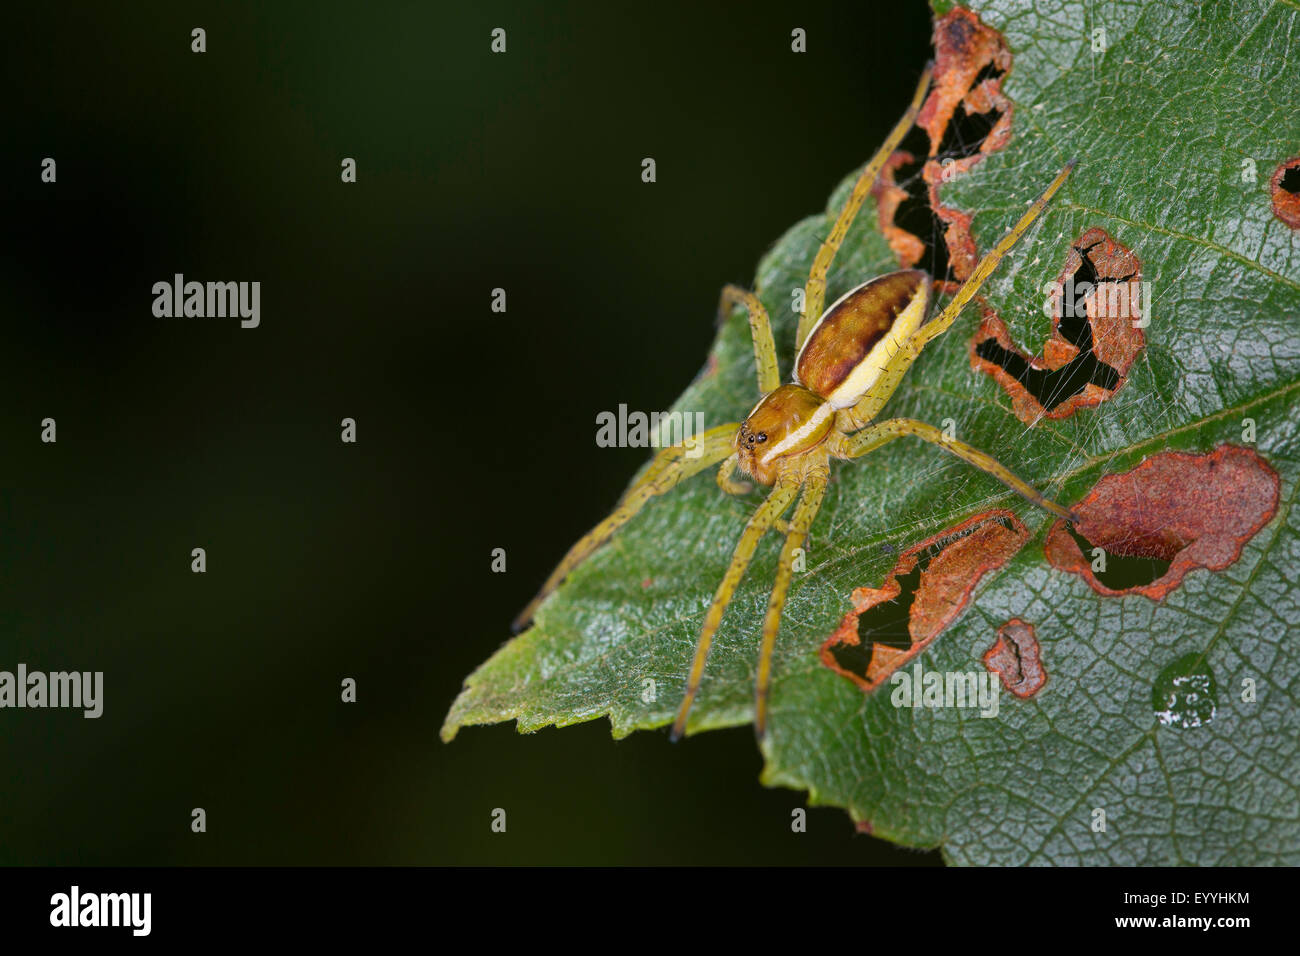 fimbriate fishing spider (Dolomedes fimbriatus), sitting on a leaf, Germany Stock Photo